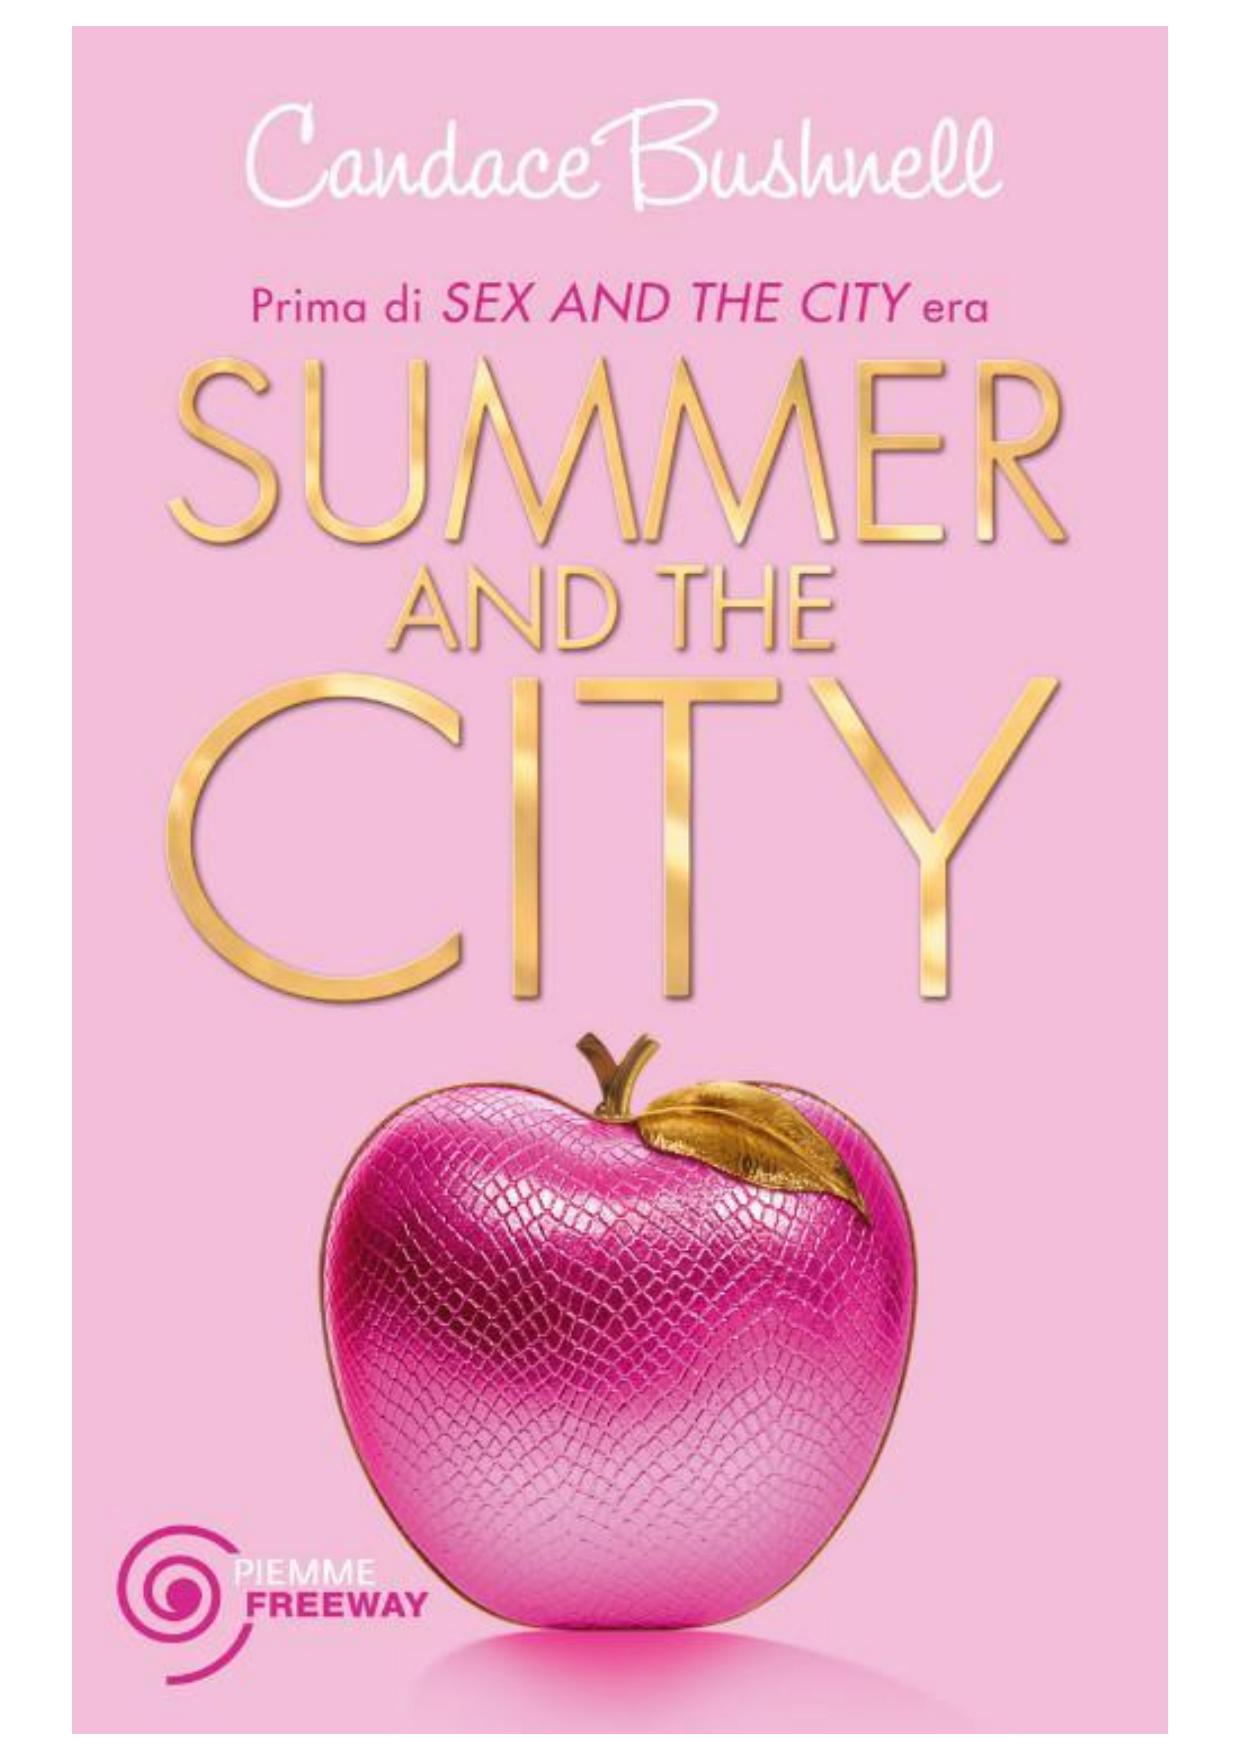 Summer And The City by Candace Bushnell